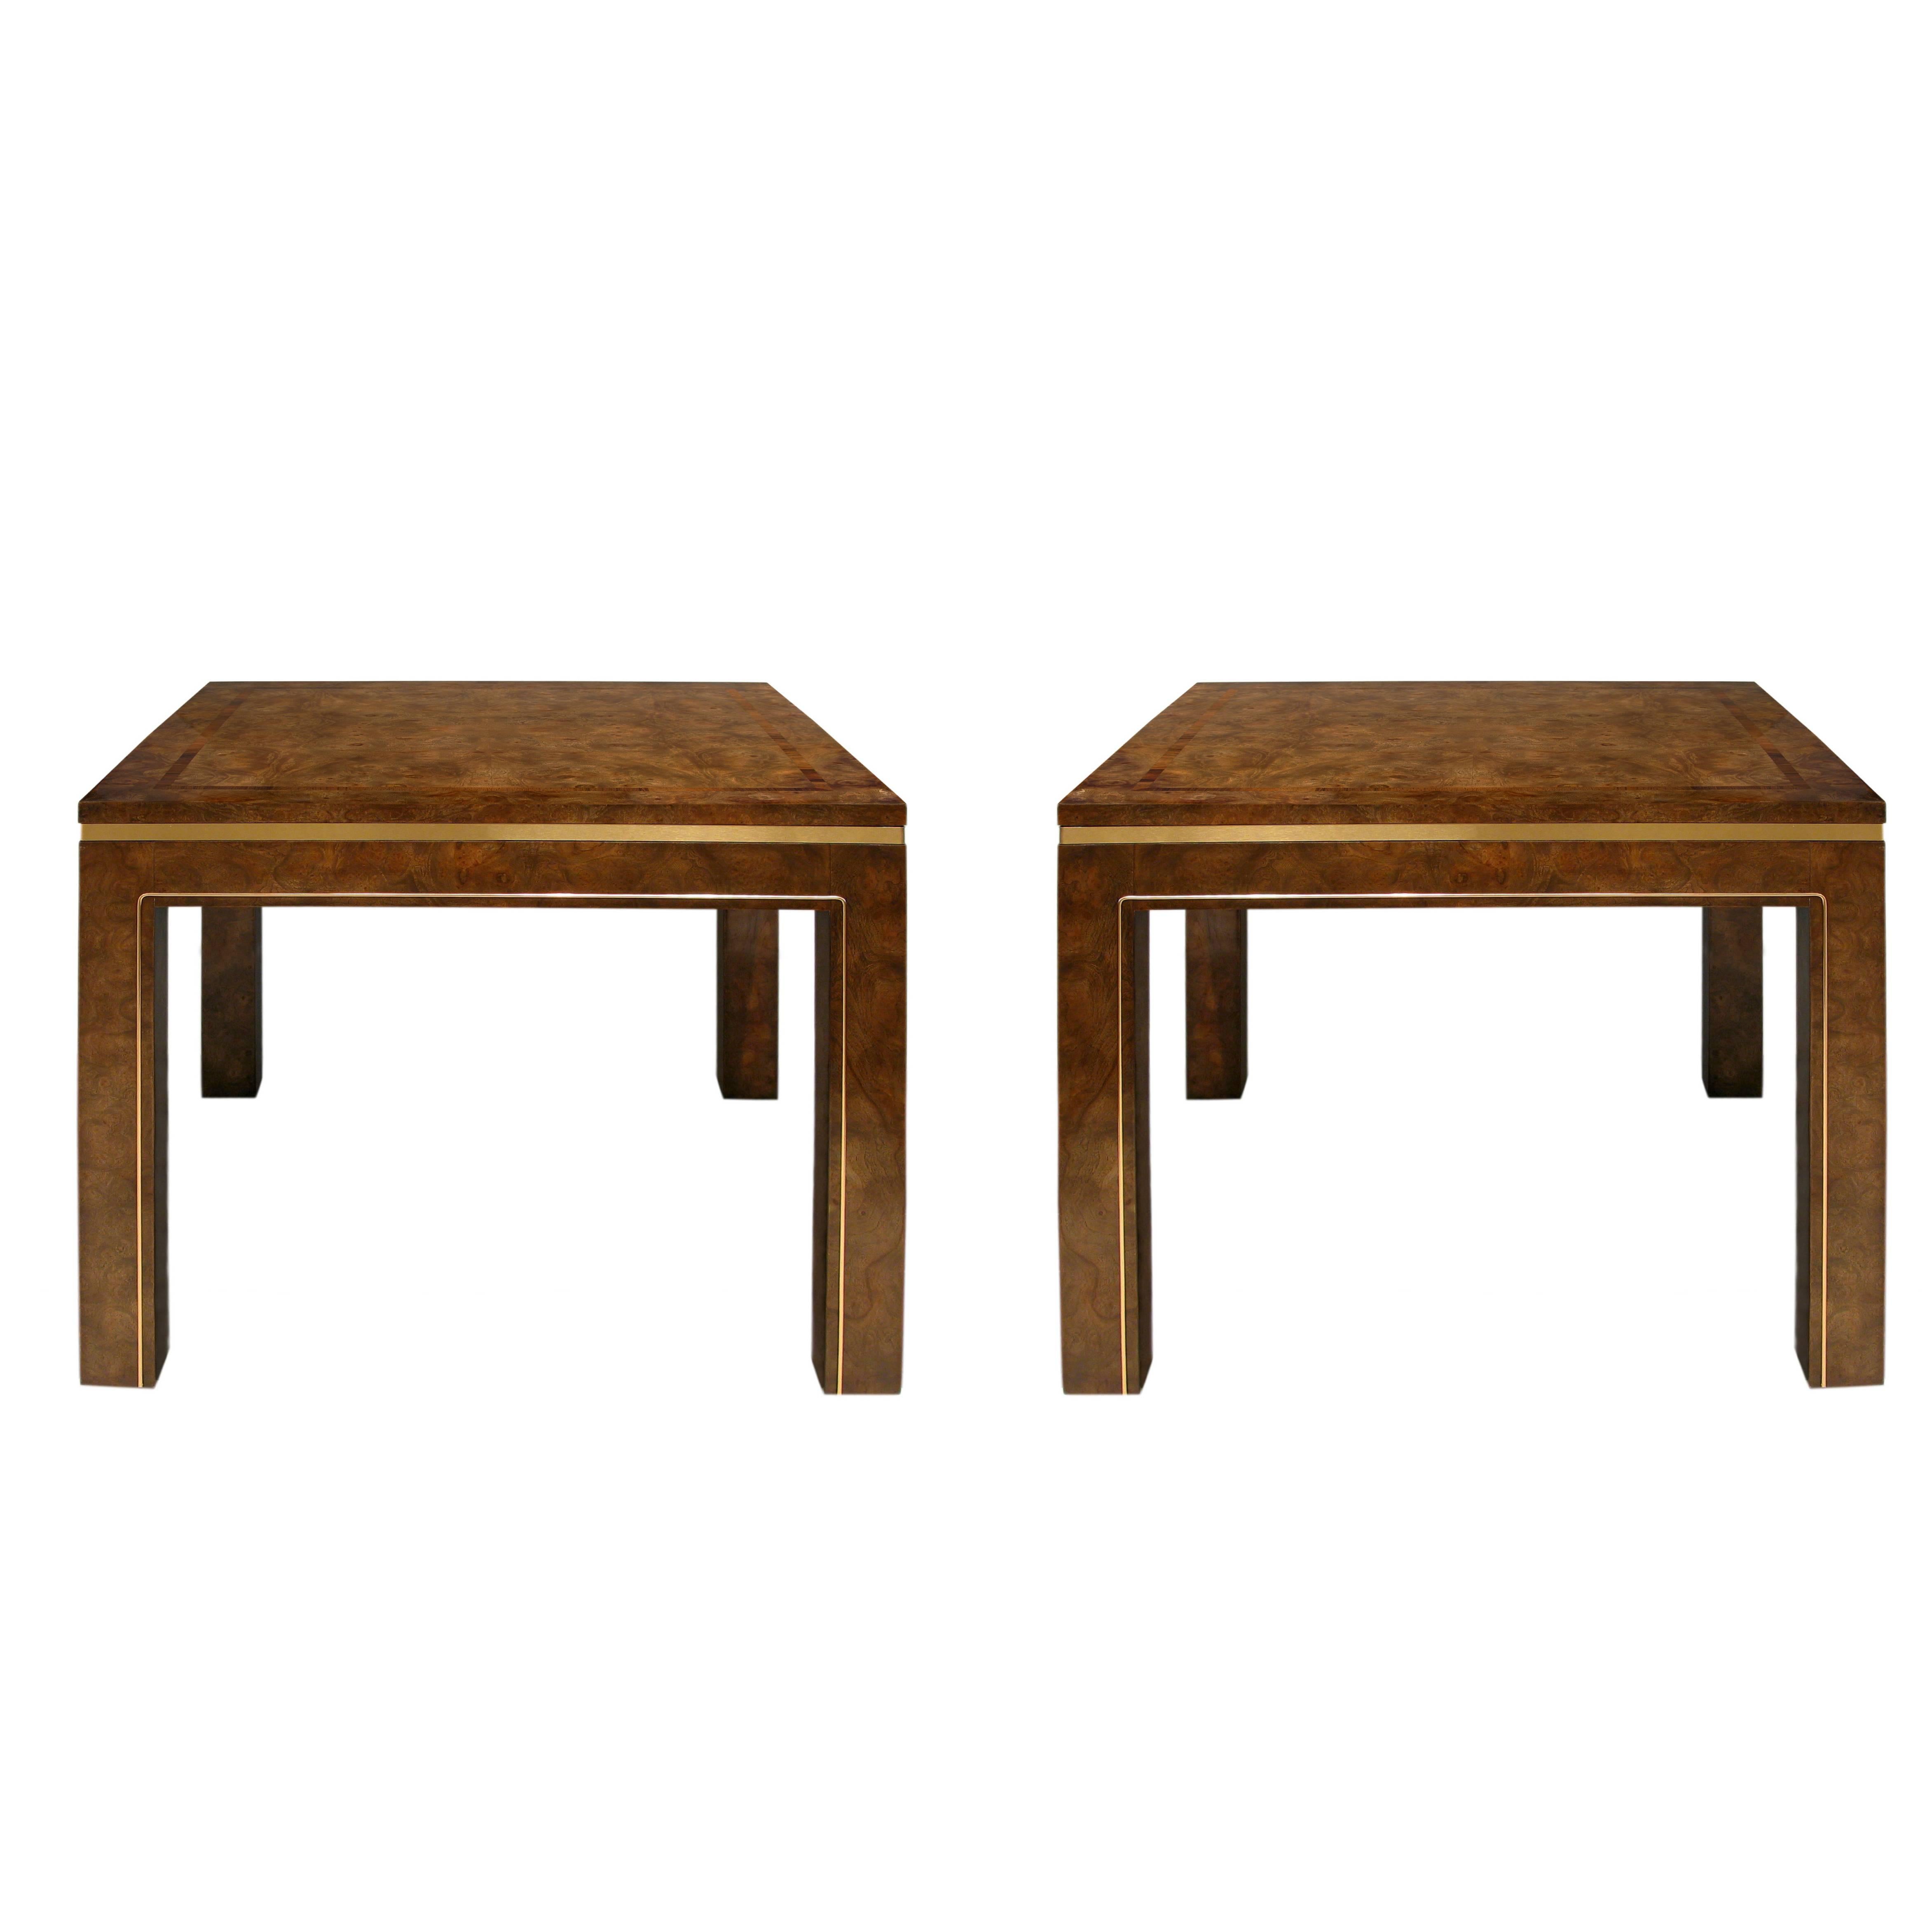 Pair of Beautifully Crafted End Tables with Brass Inlays by Mastercraft